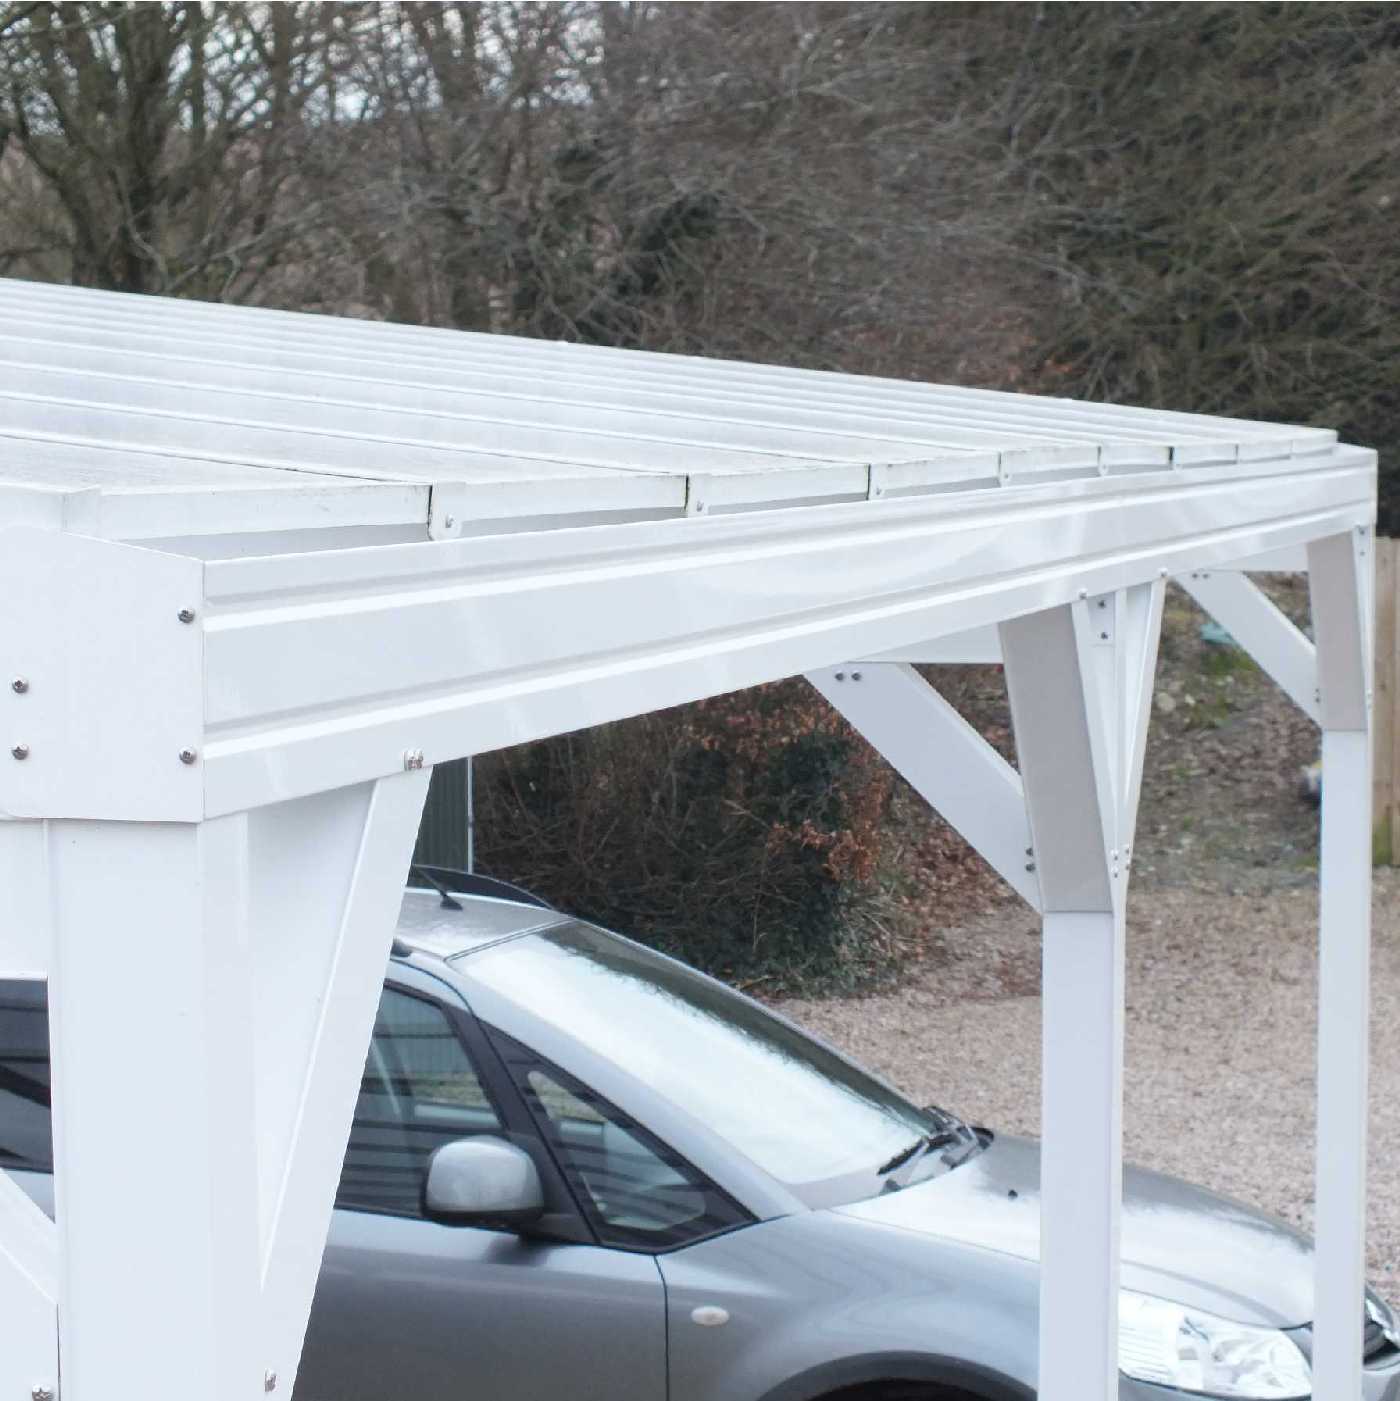 Omega Smart Free-Standing, White MonoPitch Roof Canopy with 6mm Glass Clear Plate Polycarbonate Glazing - 7.0m (W) x 4.0m (P), (8) Supporting Posts from Omega Build